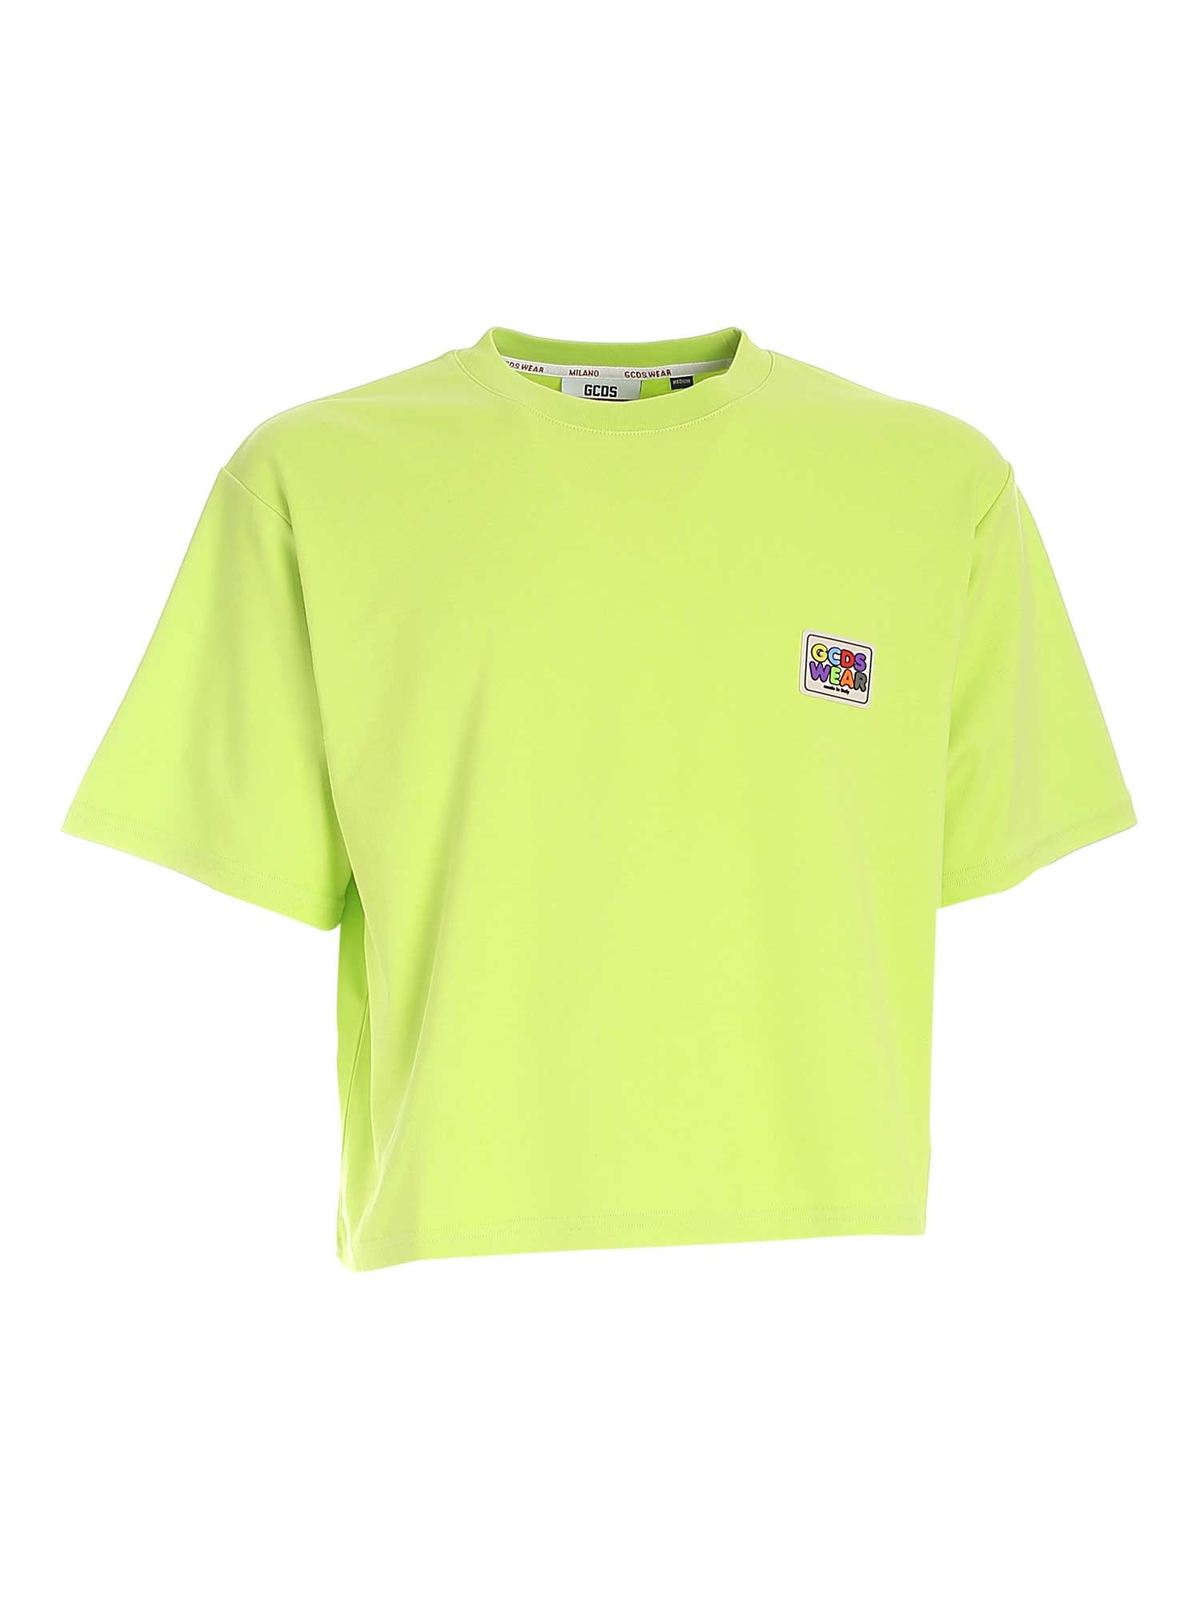 GCDS LOGO PATCH T-SHIRT IN ACID GREEN COLOR